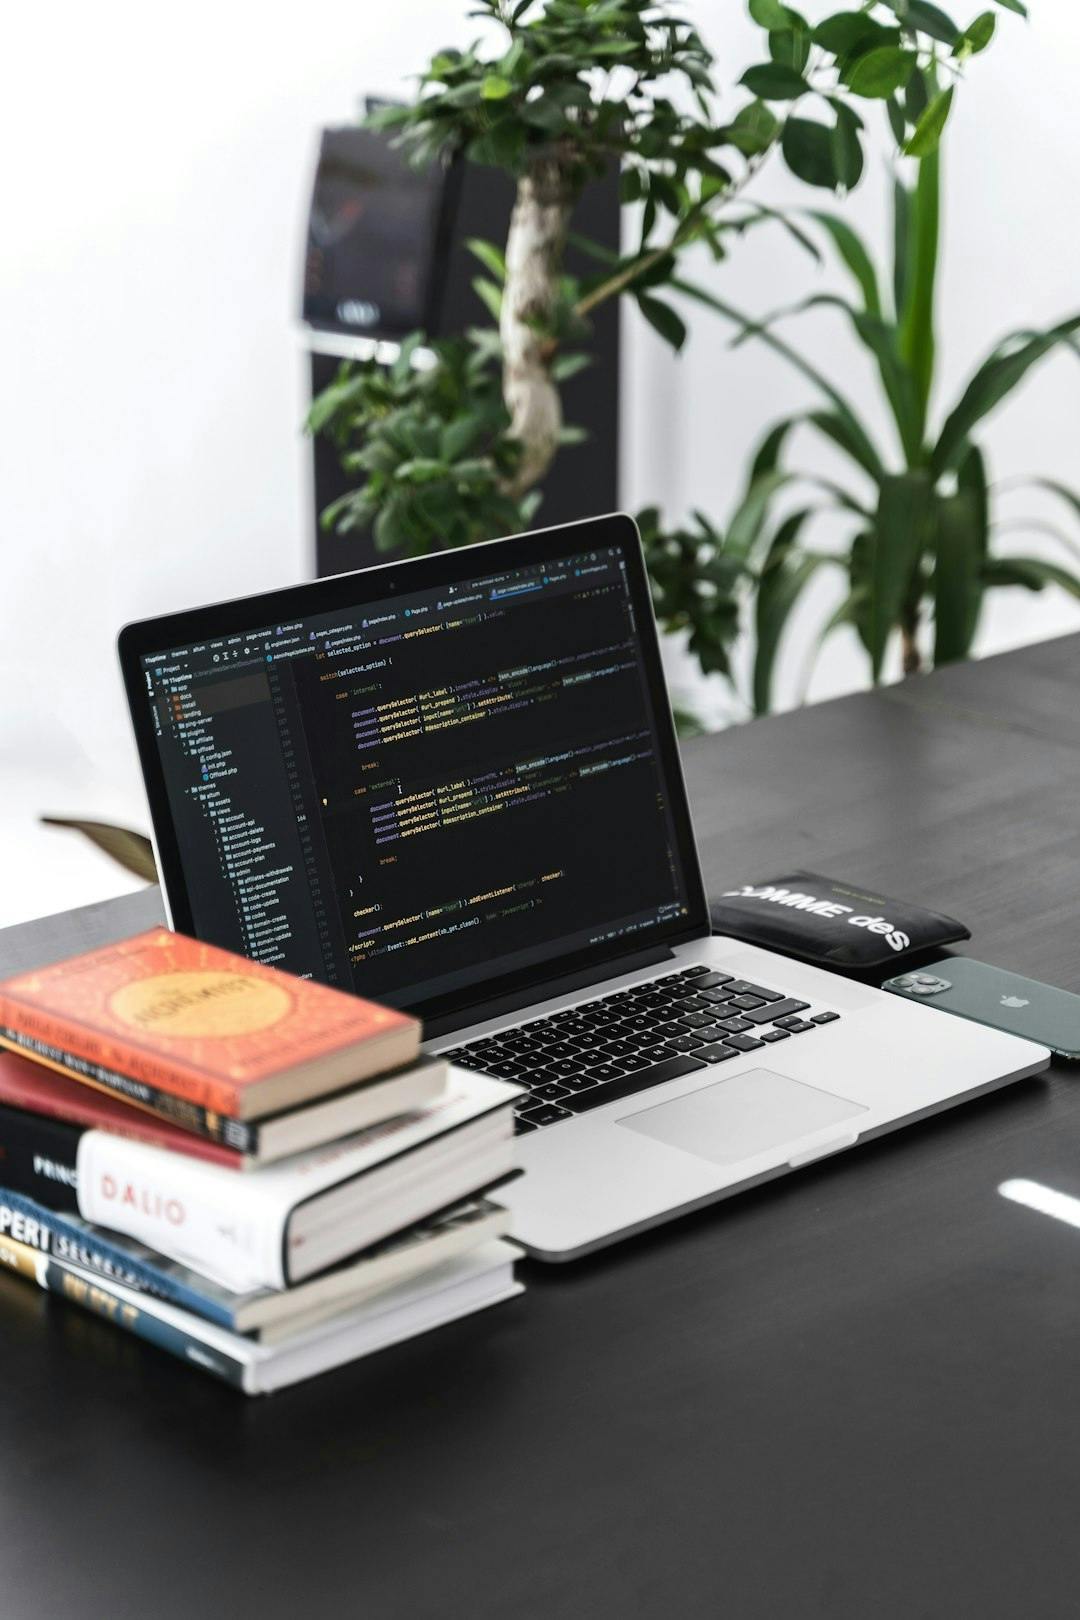 5 Programming Languages That Every Developer Should Learn